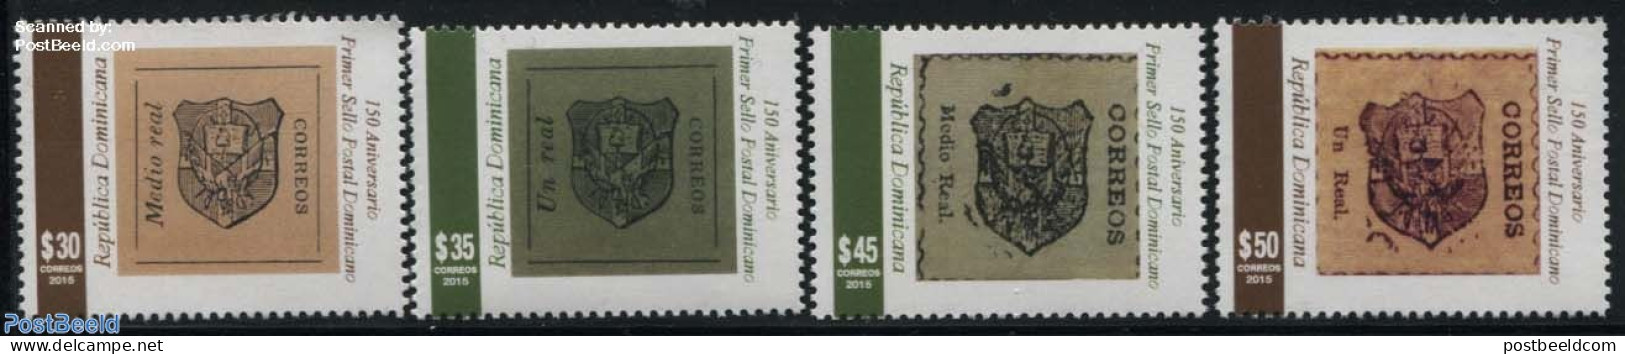 Dominican Republic 2015 150 Years Stamps 4v, Mint NH, Stamps On Stamps - Sellos Sobre Sellos